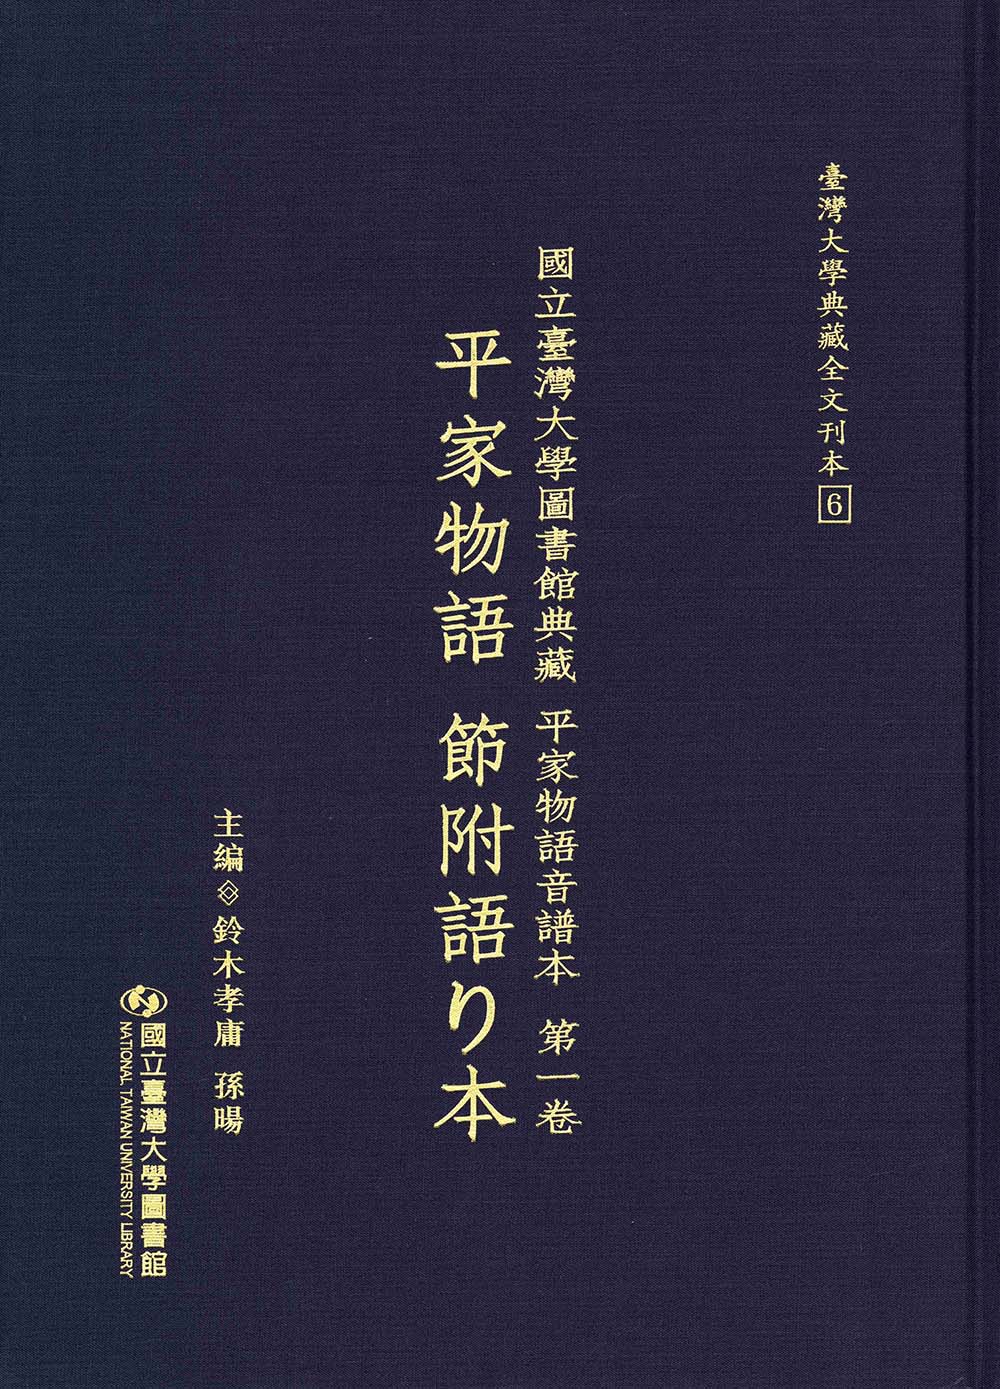 The Musical Score of The Tale of the Heike at National Taiwan University Library, Vol. 1: The Heike Monogatari (Abridged Edition)